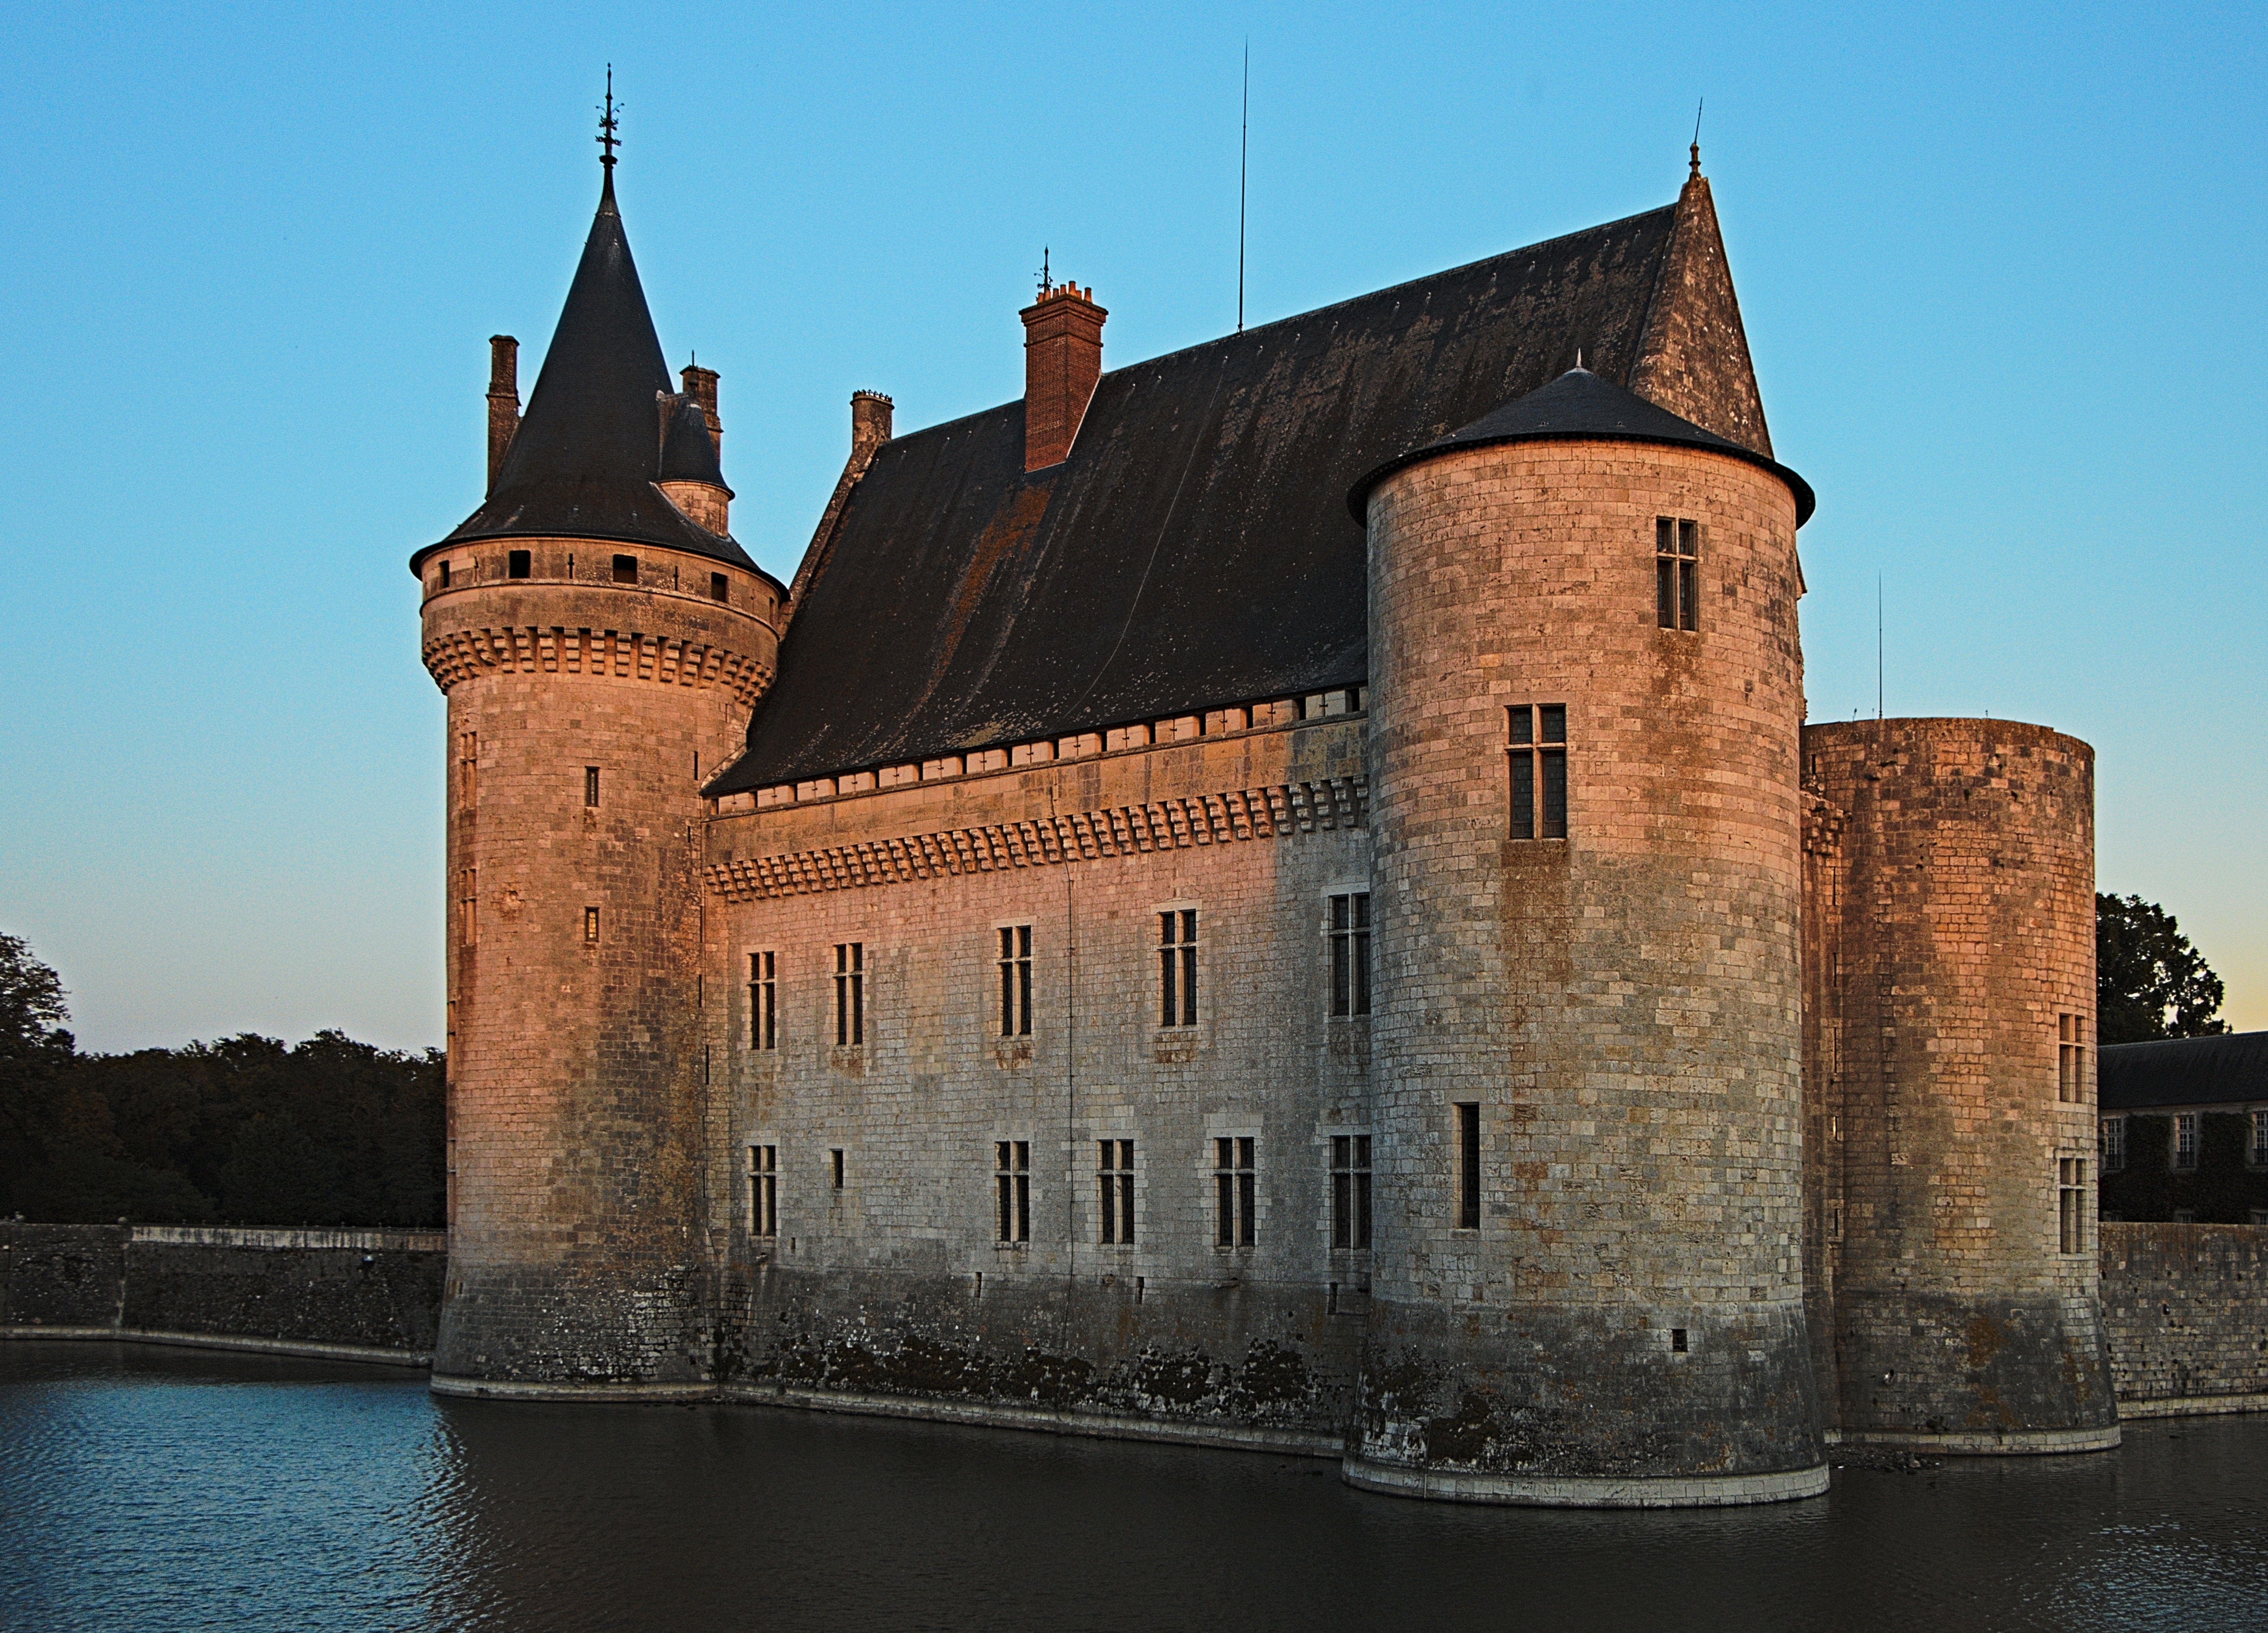 castle with river outer area under calm sky